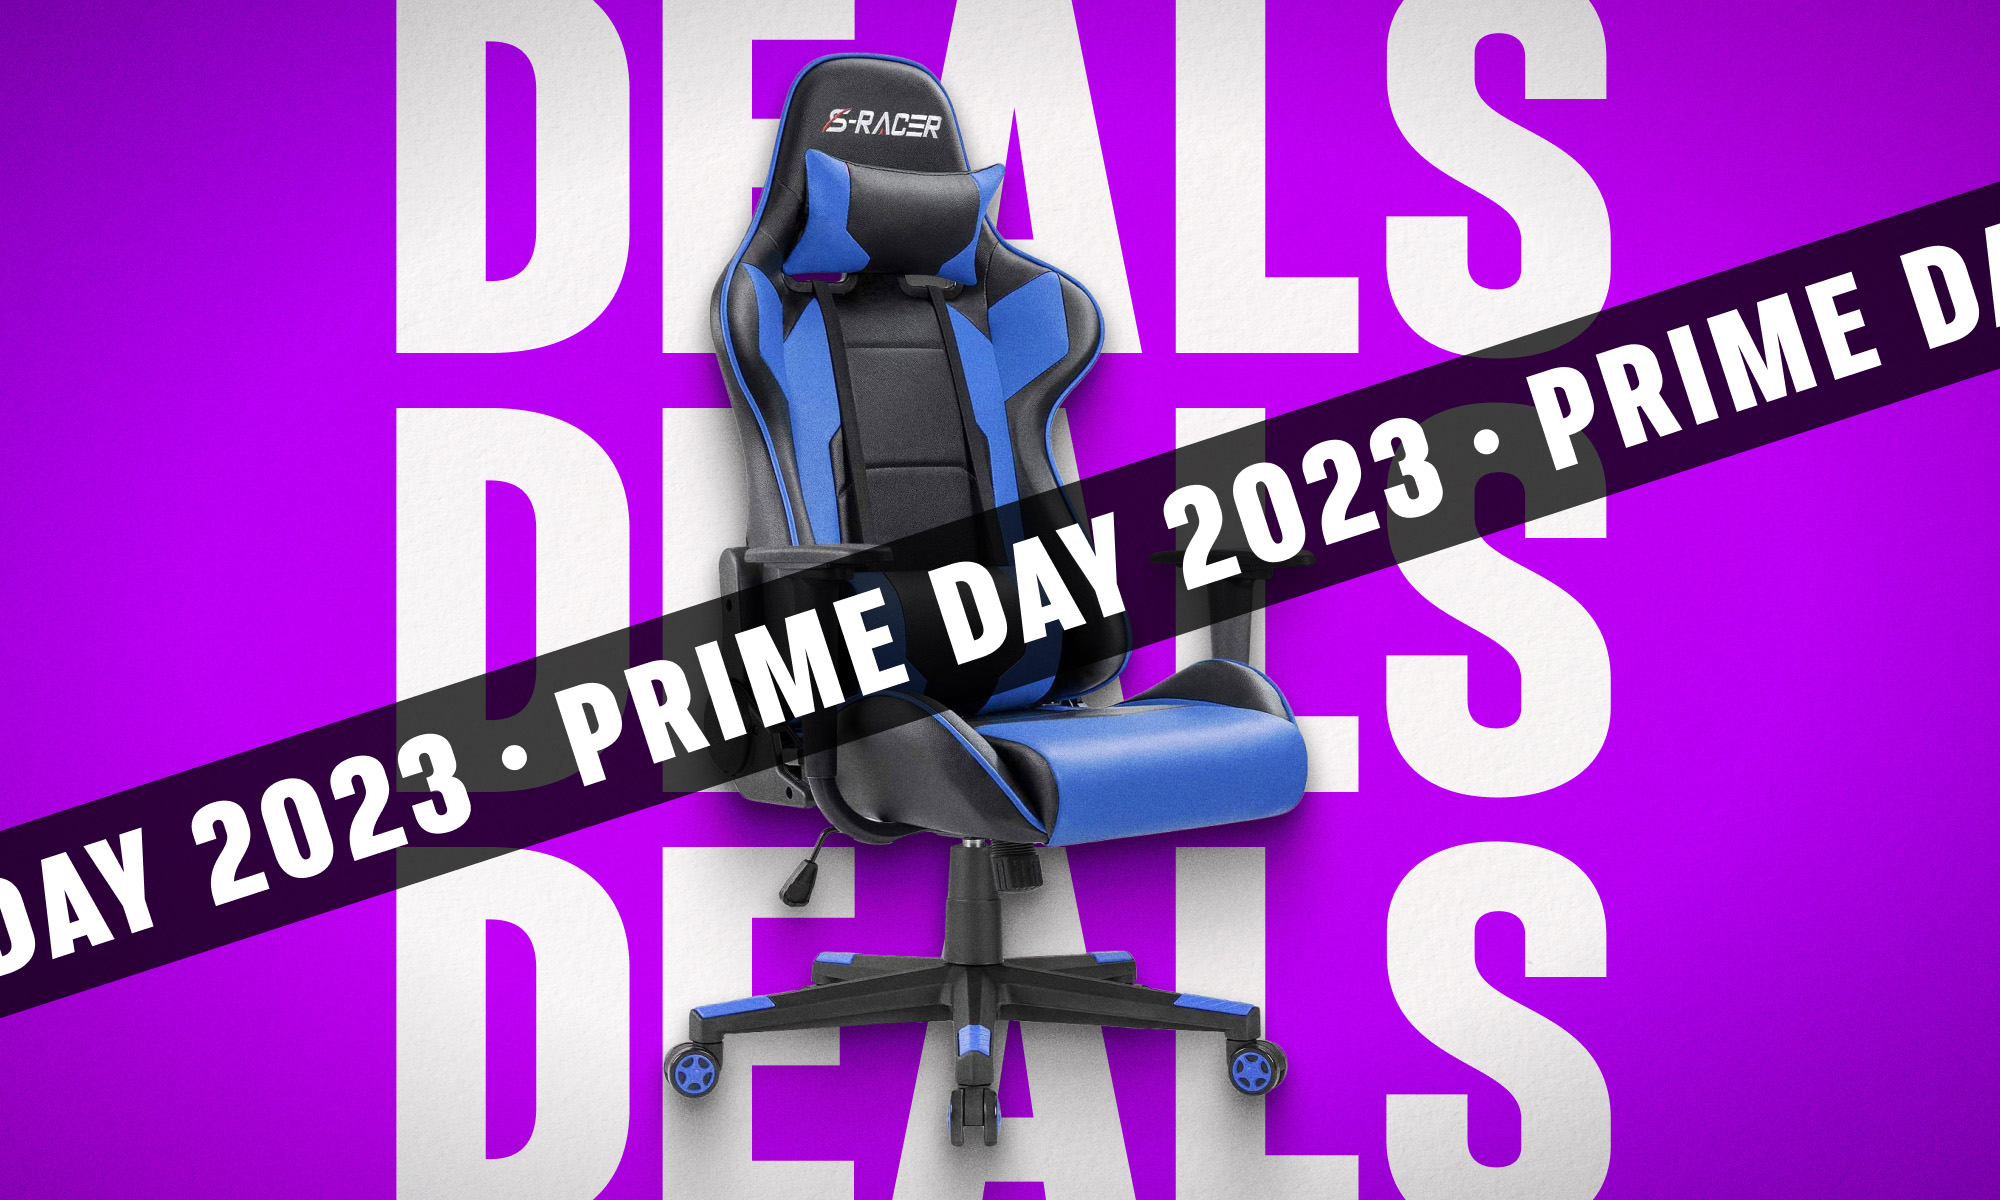 The Prime Day gaming chair deals now | Digital Trends